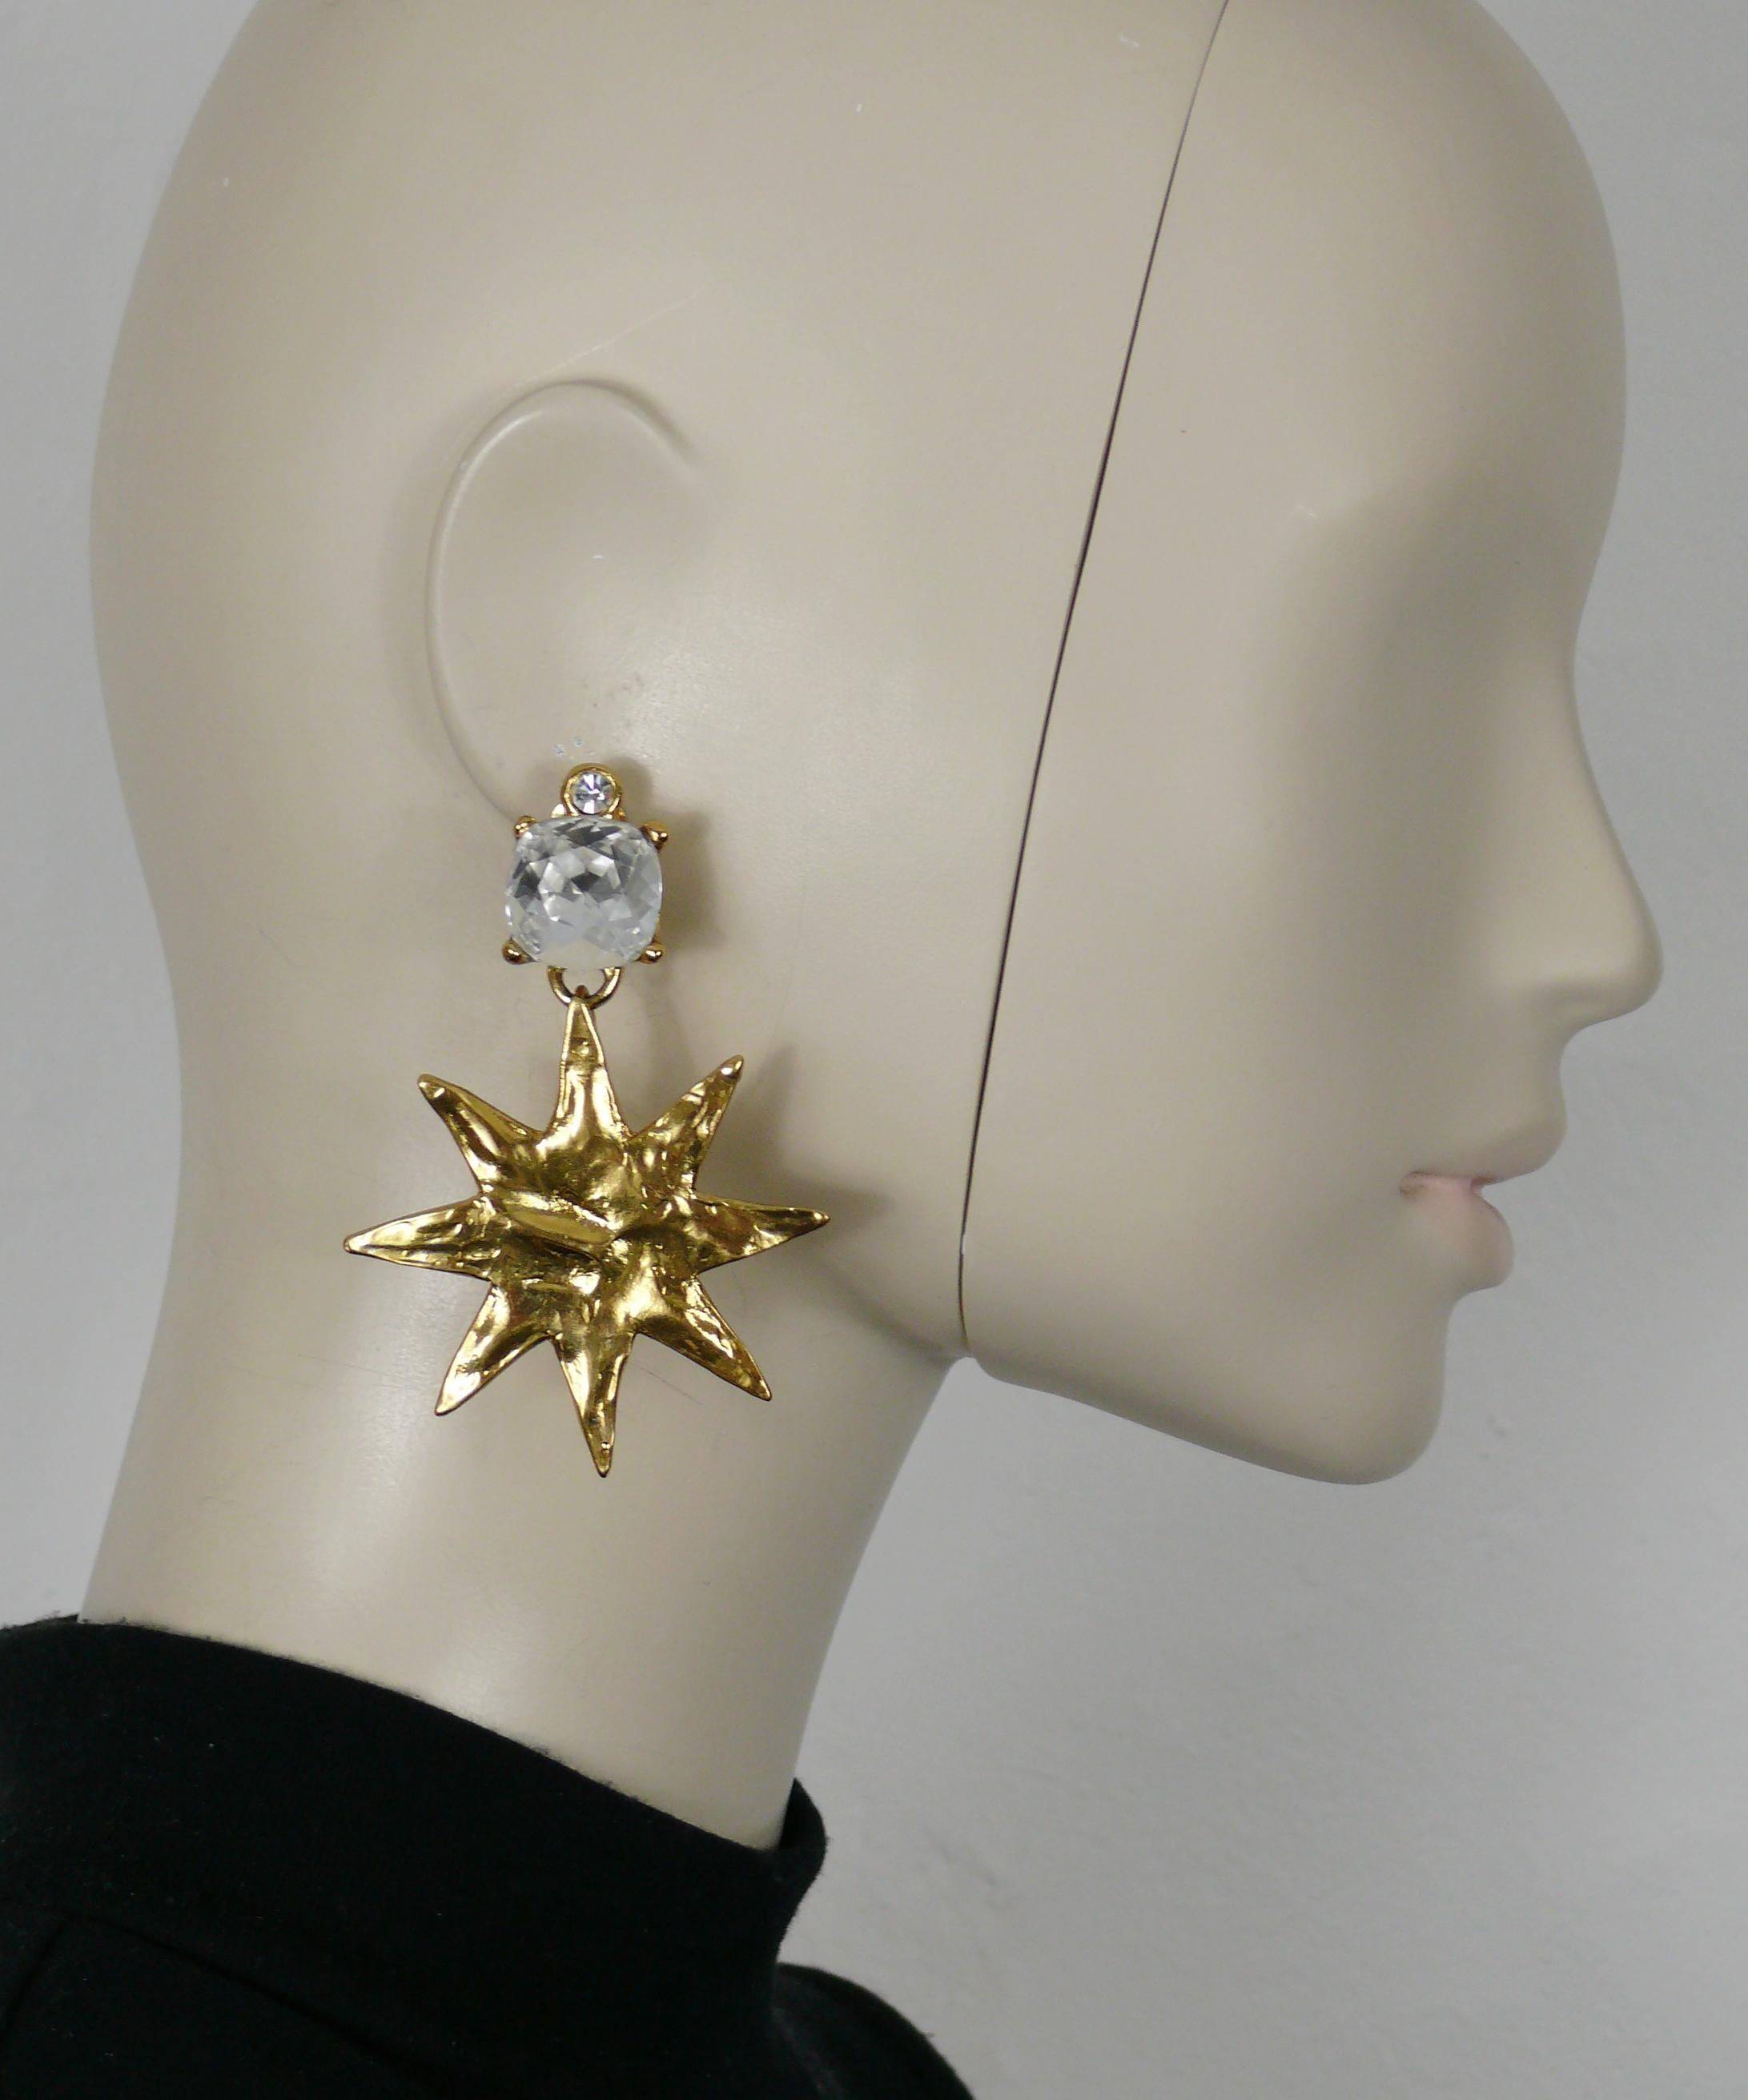 YVES SAINT LAURENT vintage gold tone dangling earrings (clip-on) featuring a large textured and stylized sun embellished with clear crystals.

Embossed YSL Made in France.

Indicative measurements : height approx. 8 cm (3.15 inches) / max. width